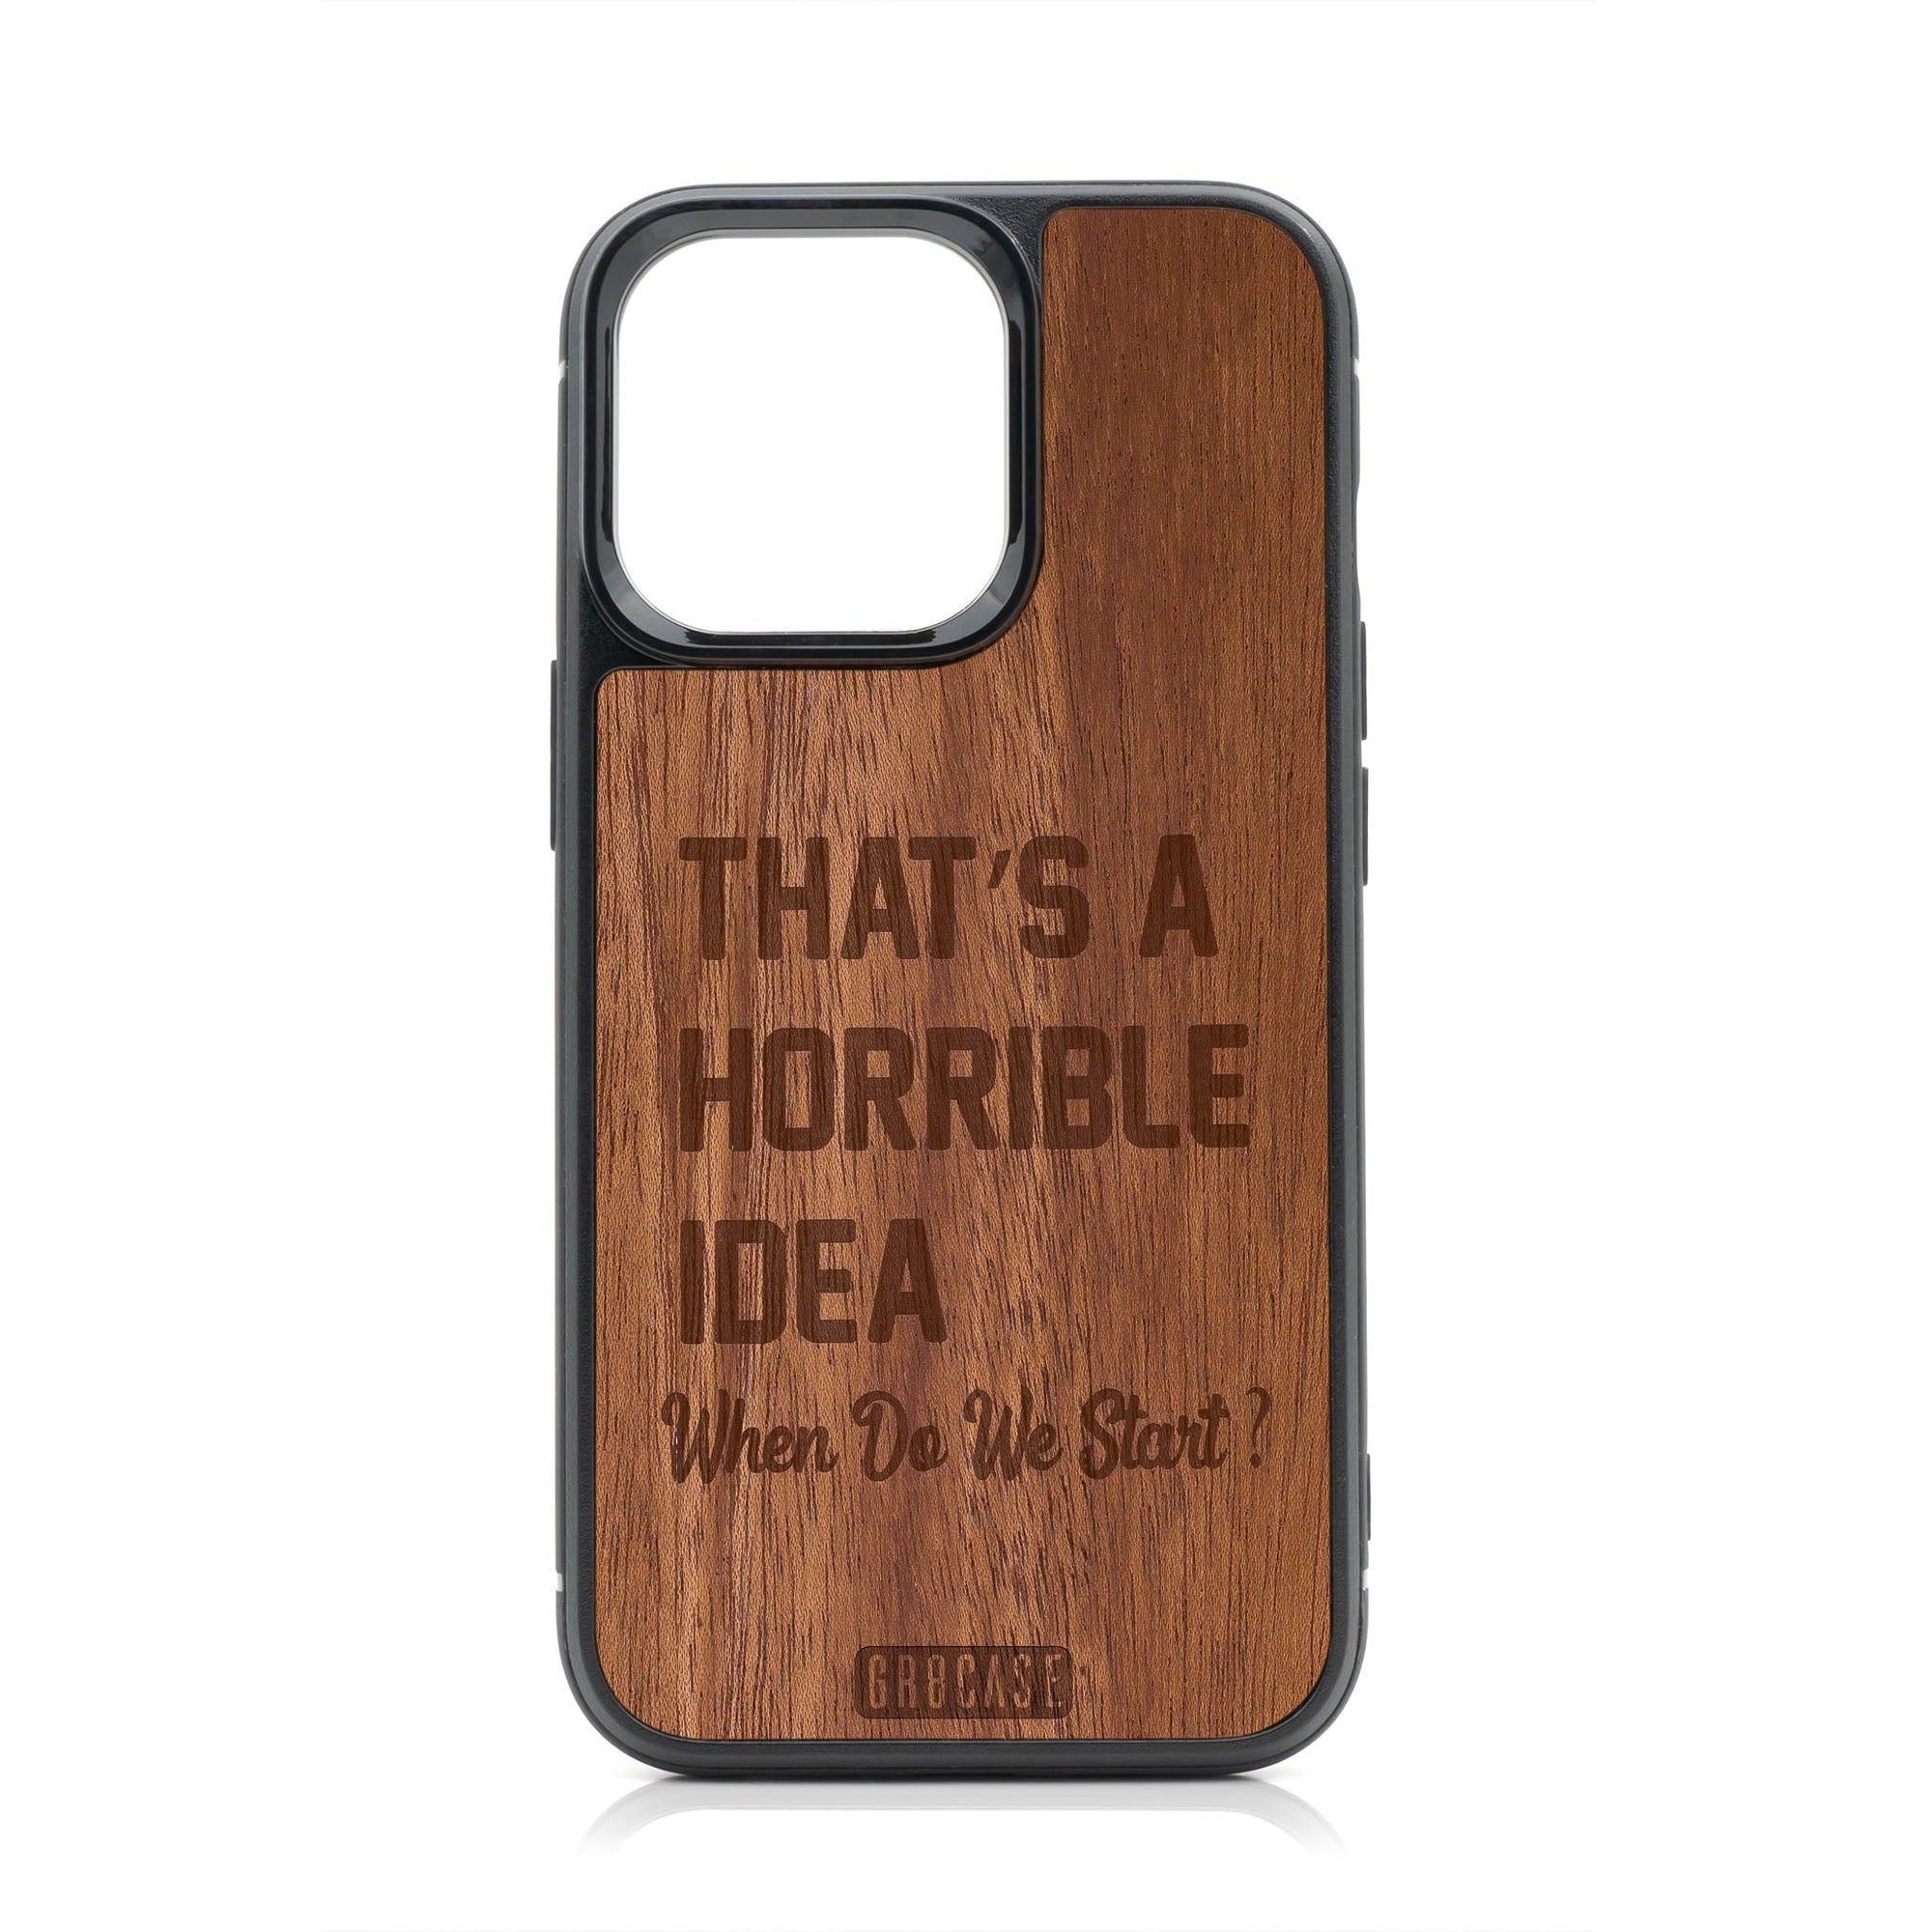 That's A Horrible Idea When Do We Start? Design Wood Case For iPhone 15 Pro